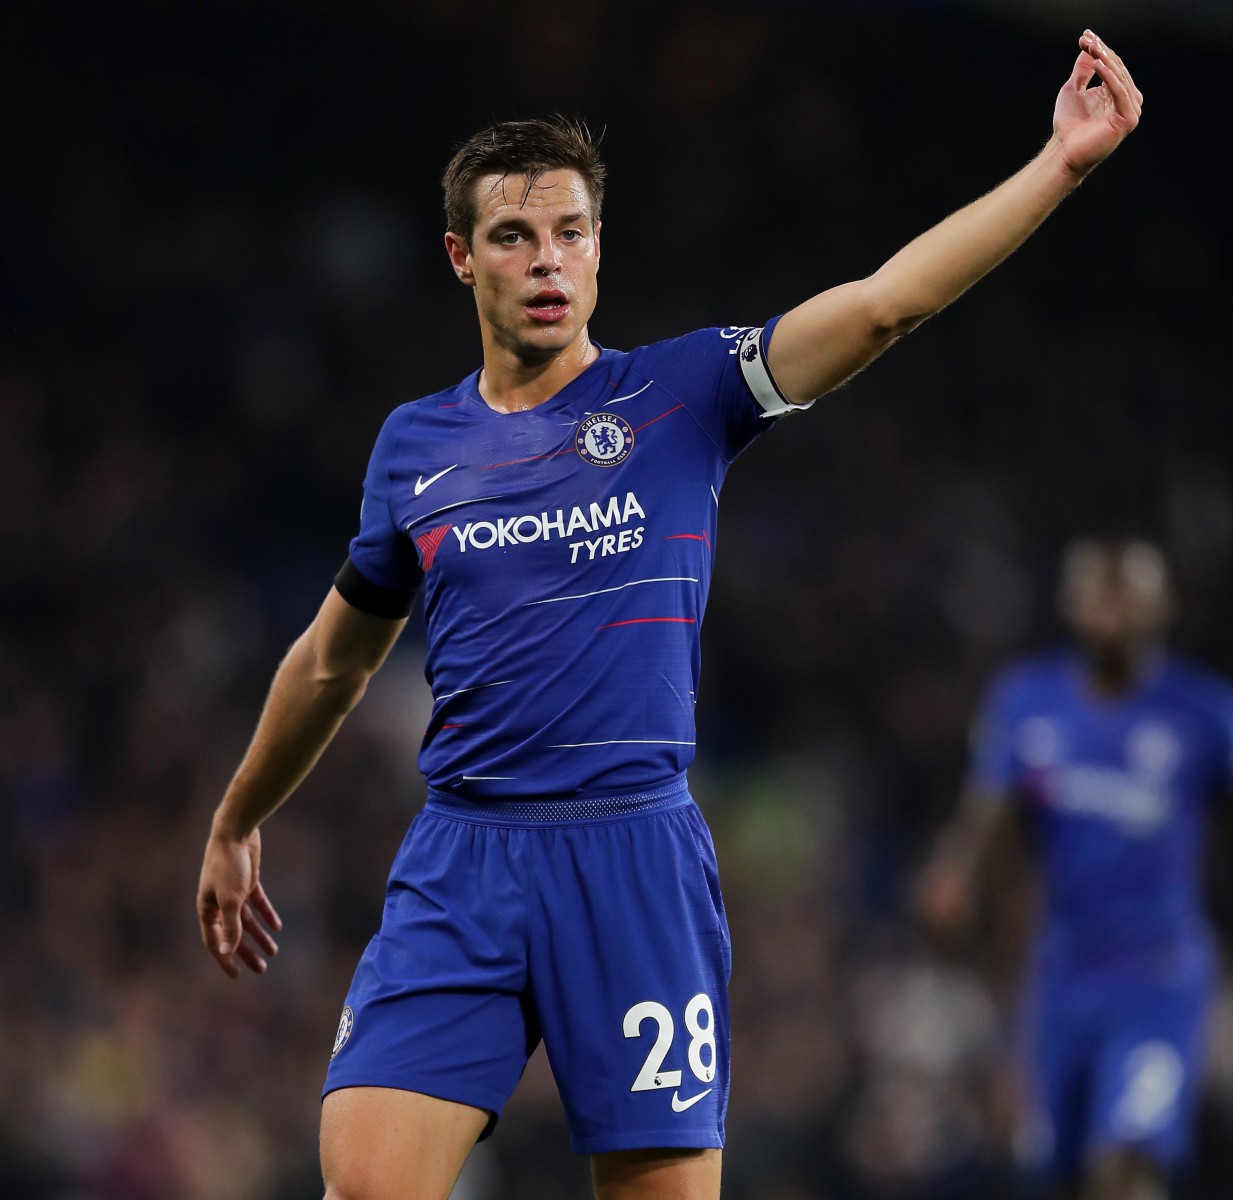 , Chelseas greatest threat is their transfer ban ending as Azpilicueta finds even he isnt safe in Lampards revolution